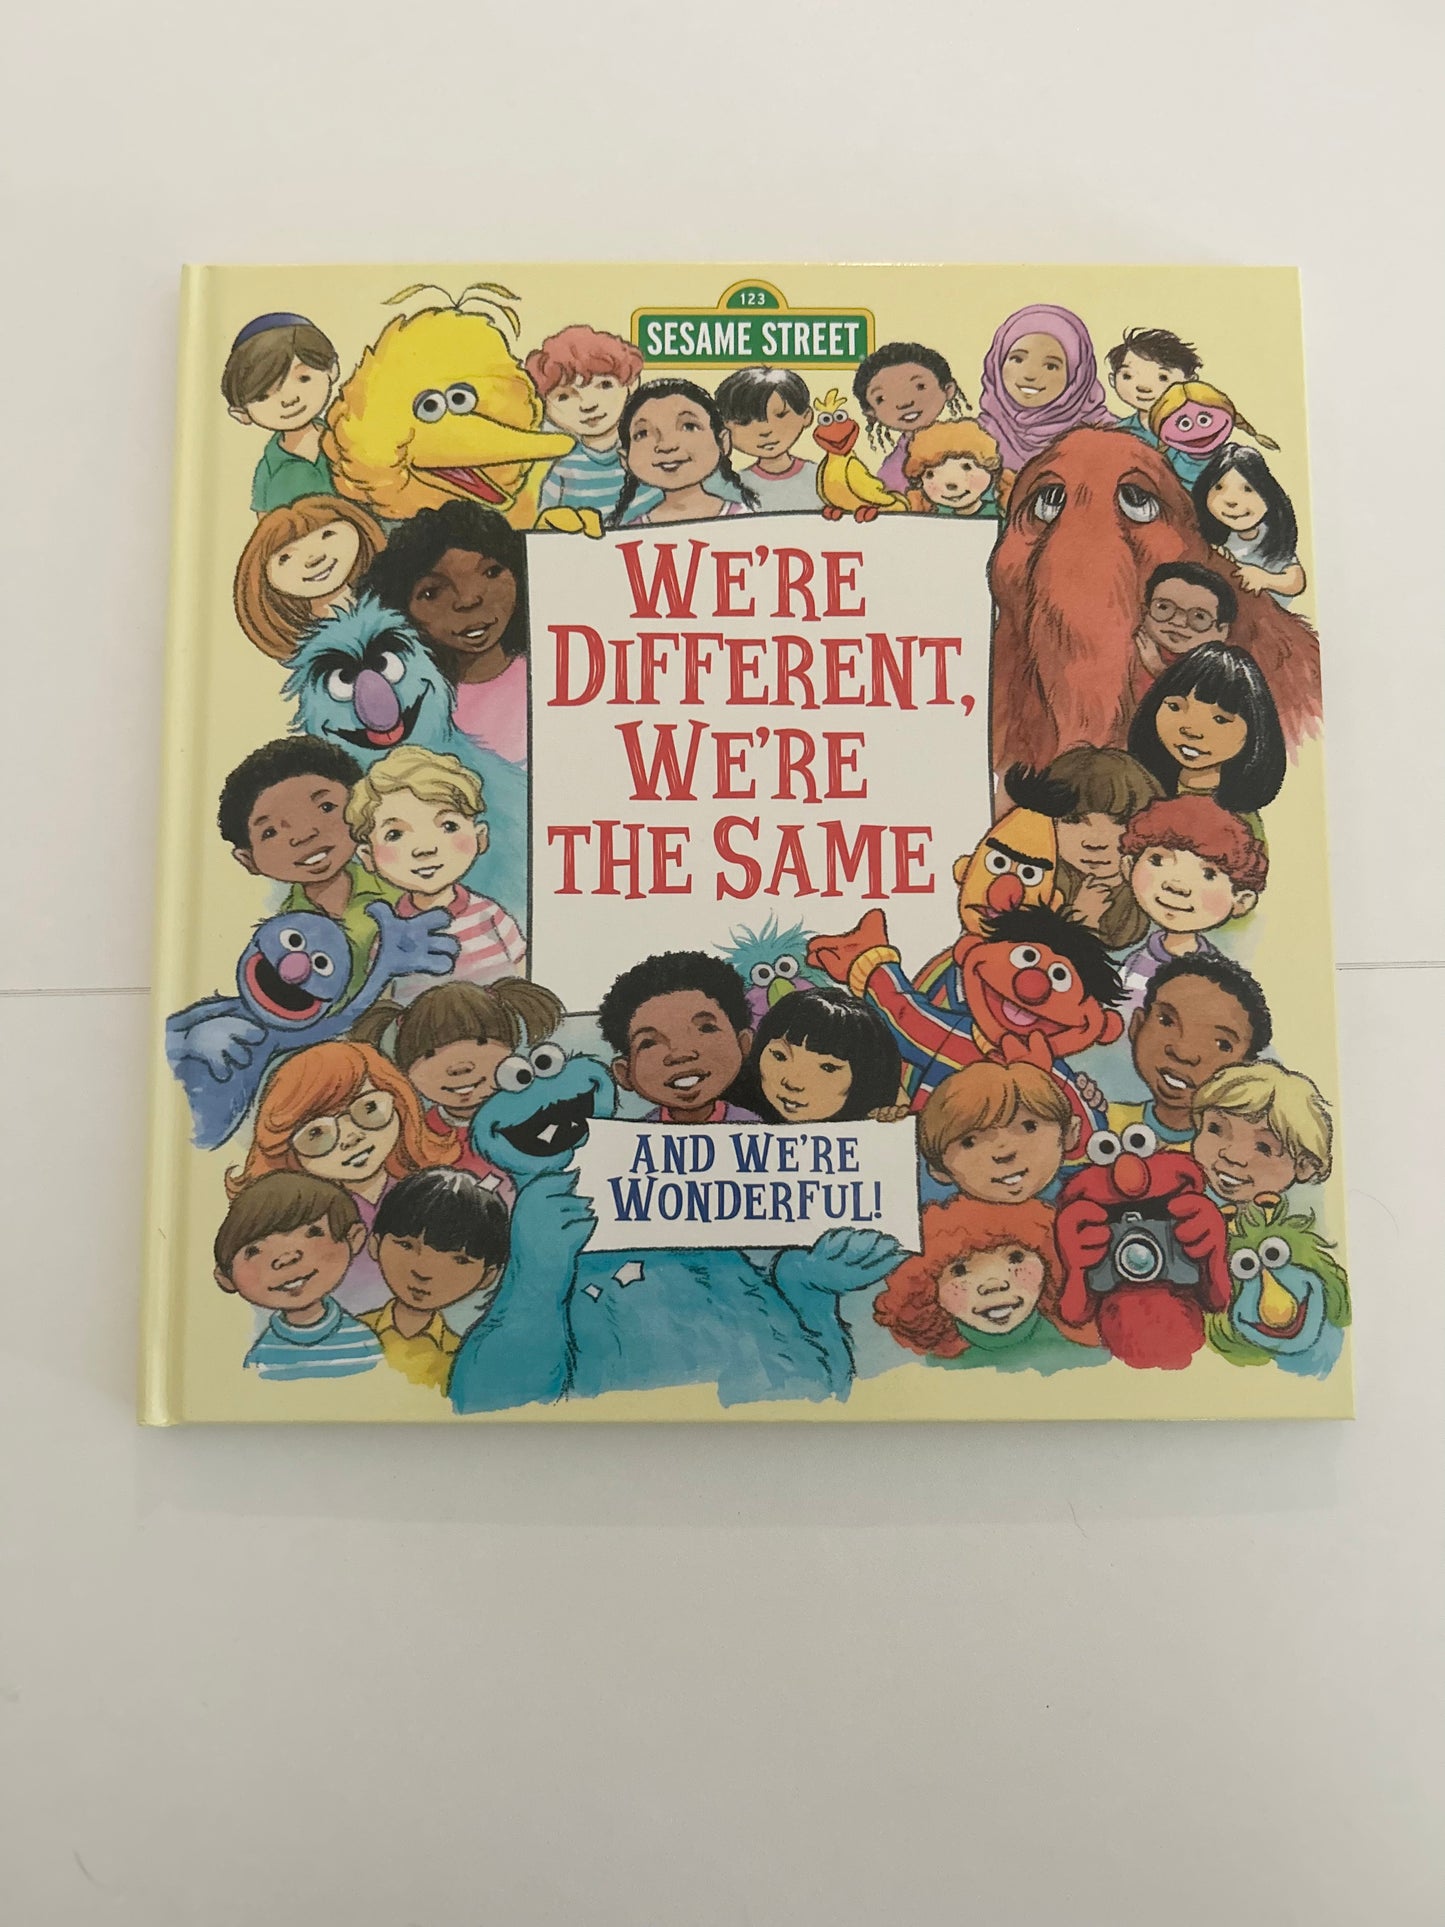 Sesame Street | Book "We're Different, We're the Same"